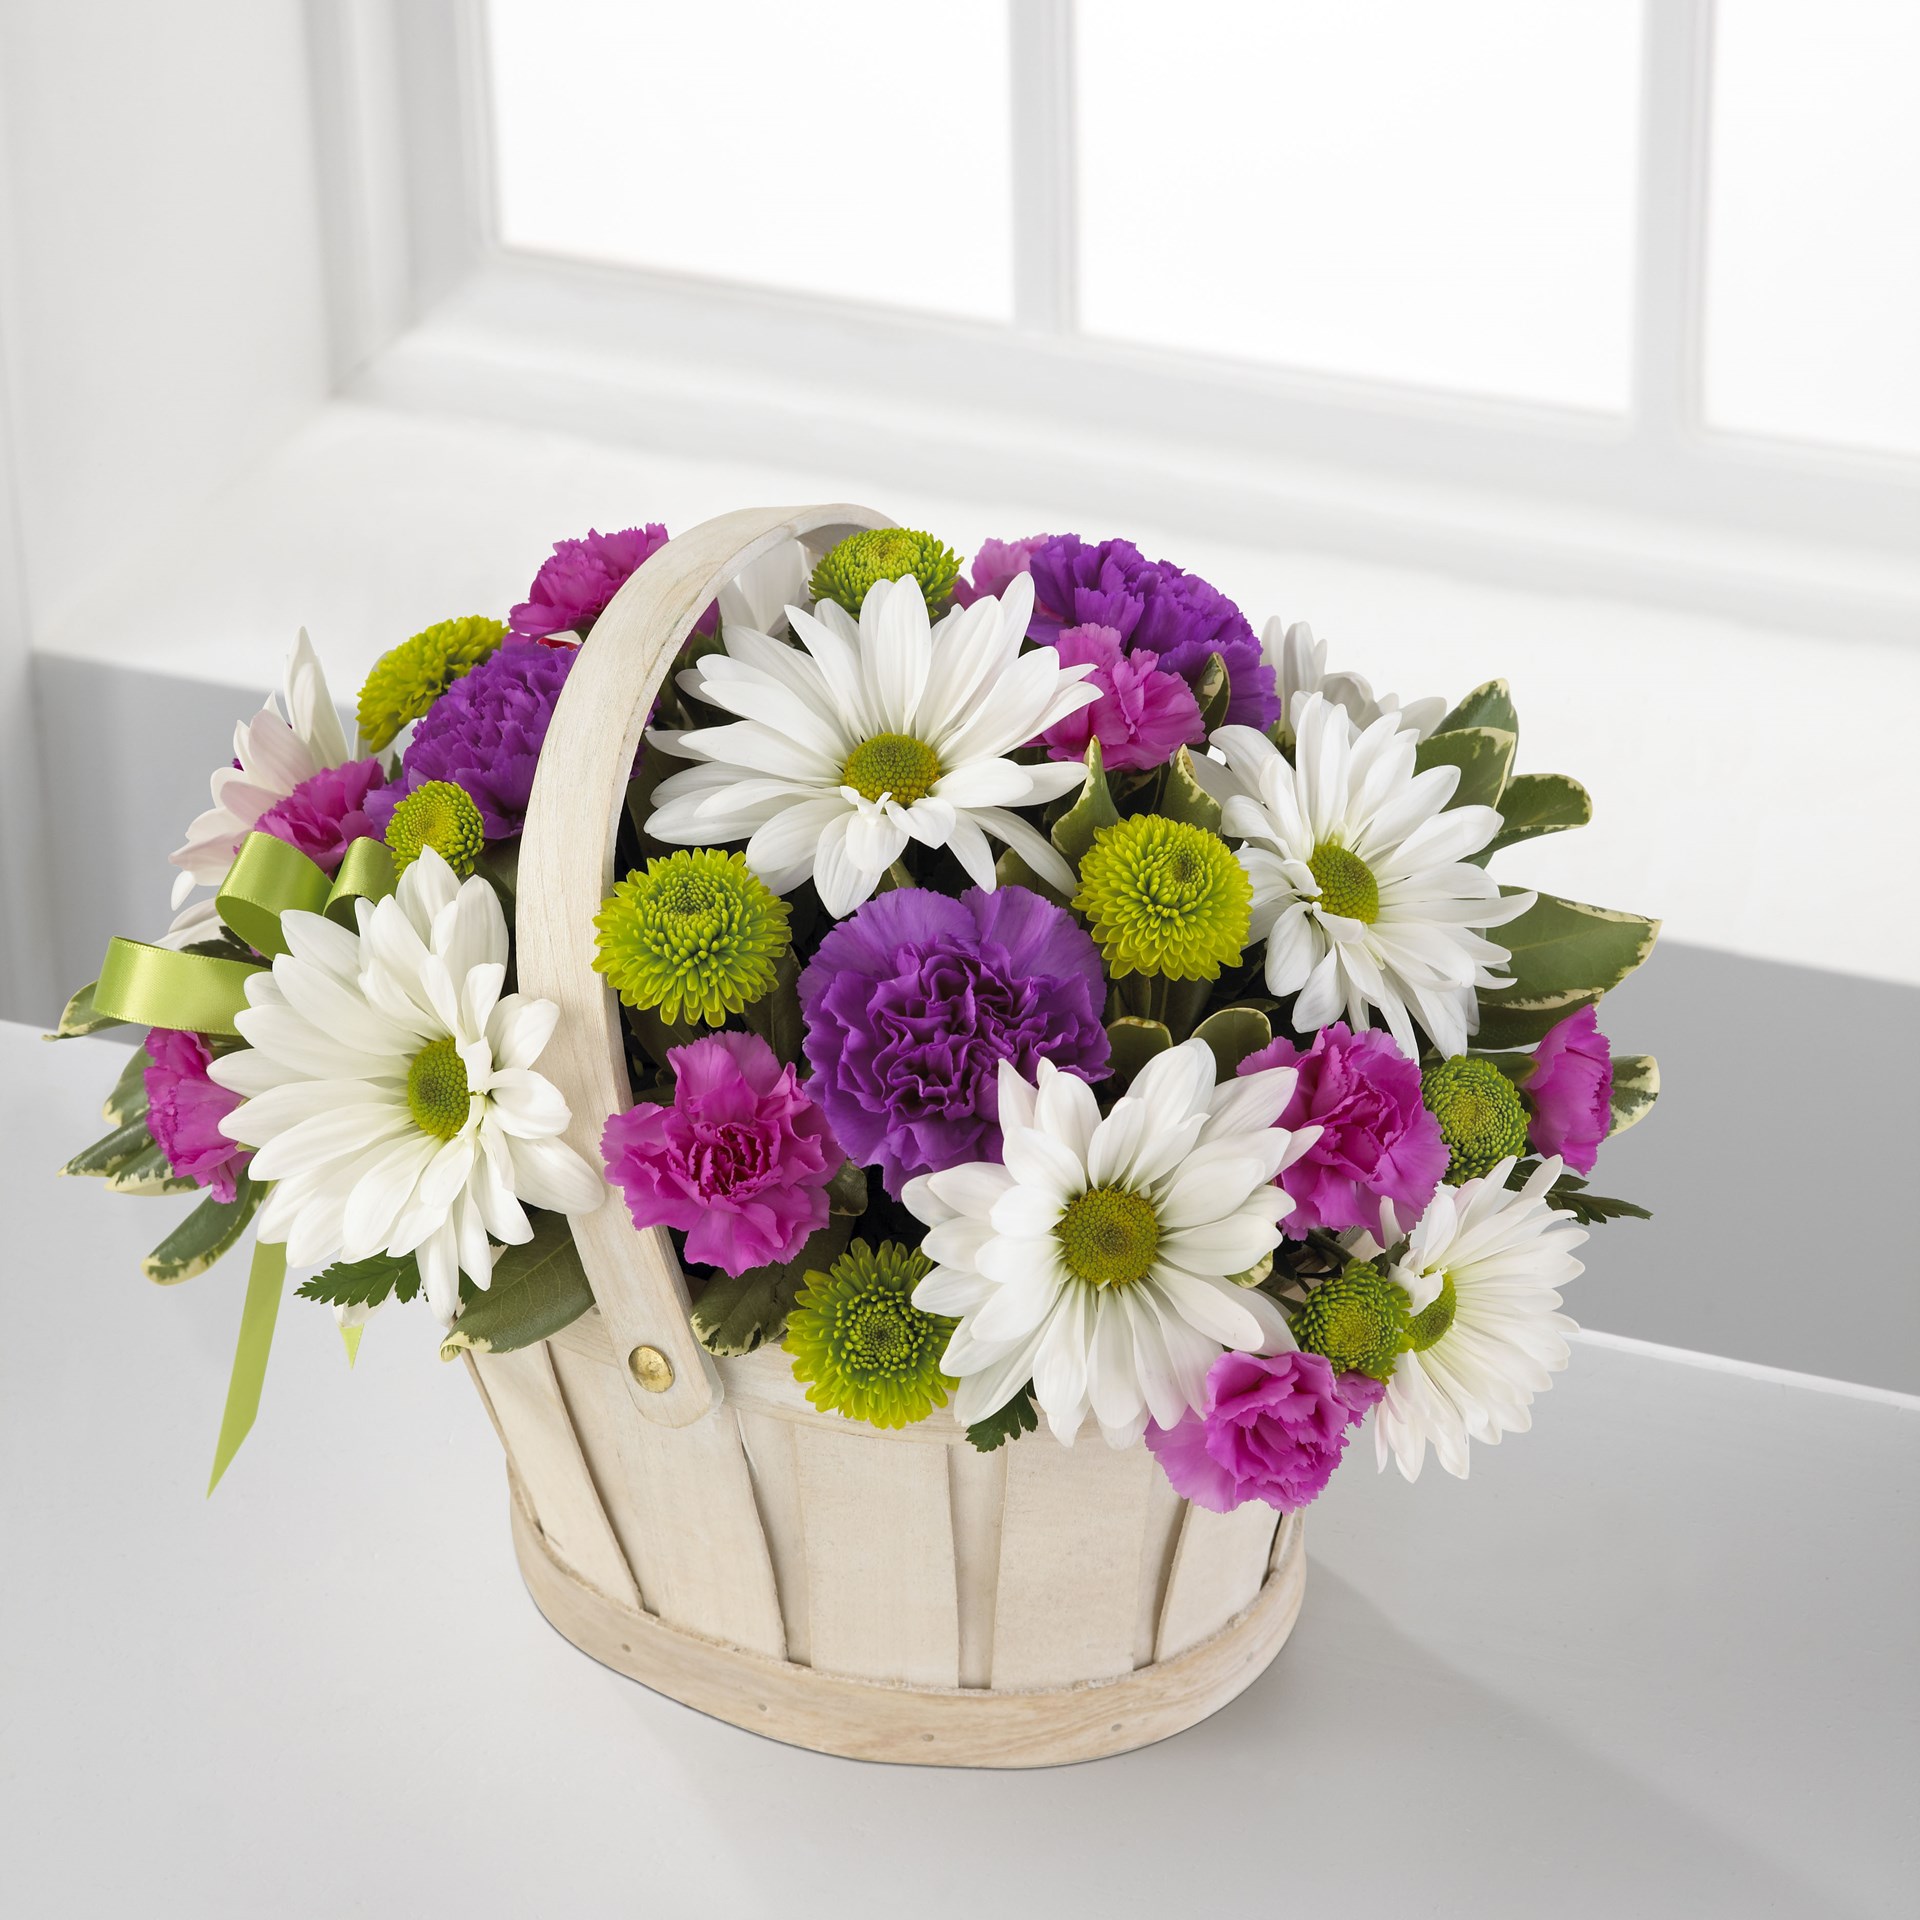 product image for The FTD Blooming Bounty Bouquet - Basket included